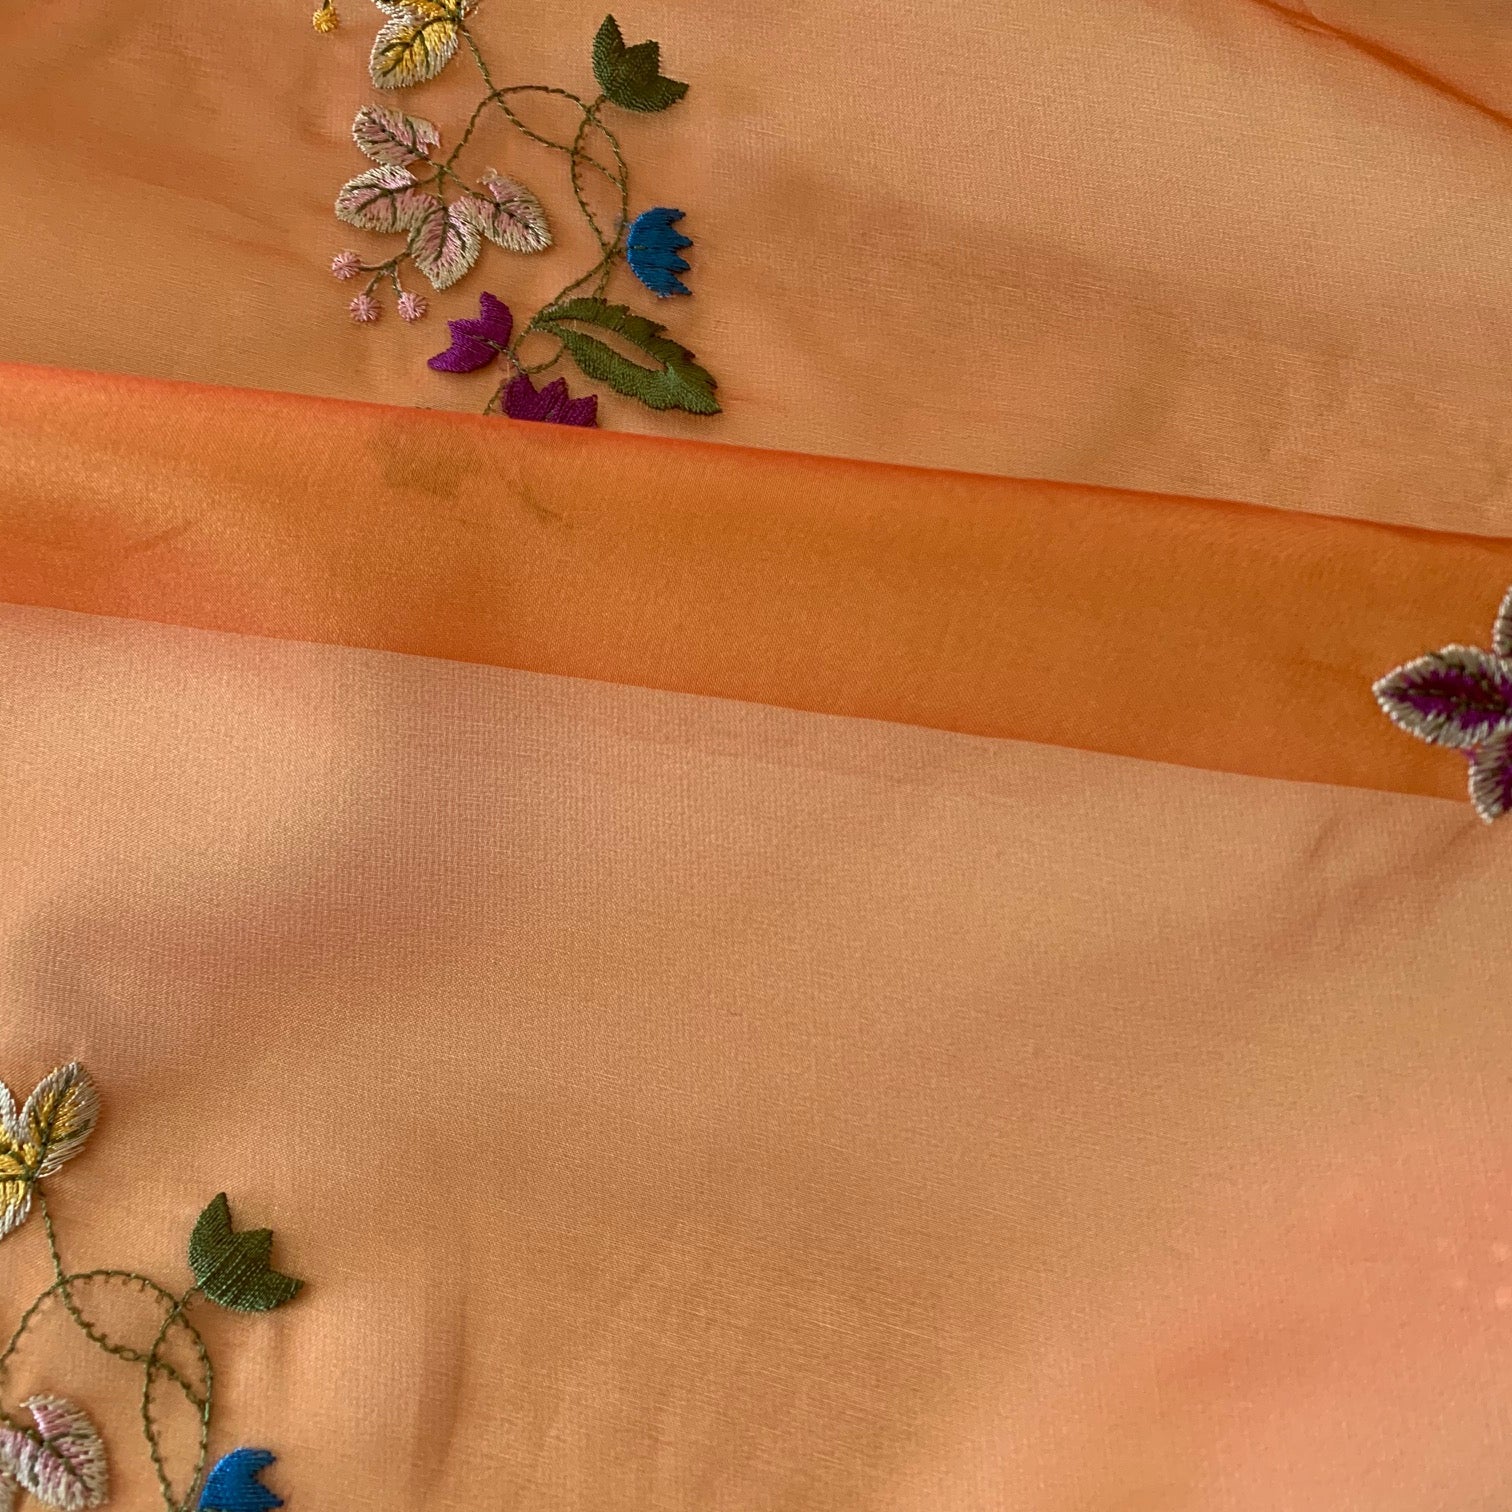 Displaying venetia a saffron colored fabric with Floral rayon embroidery on silk organza